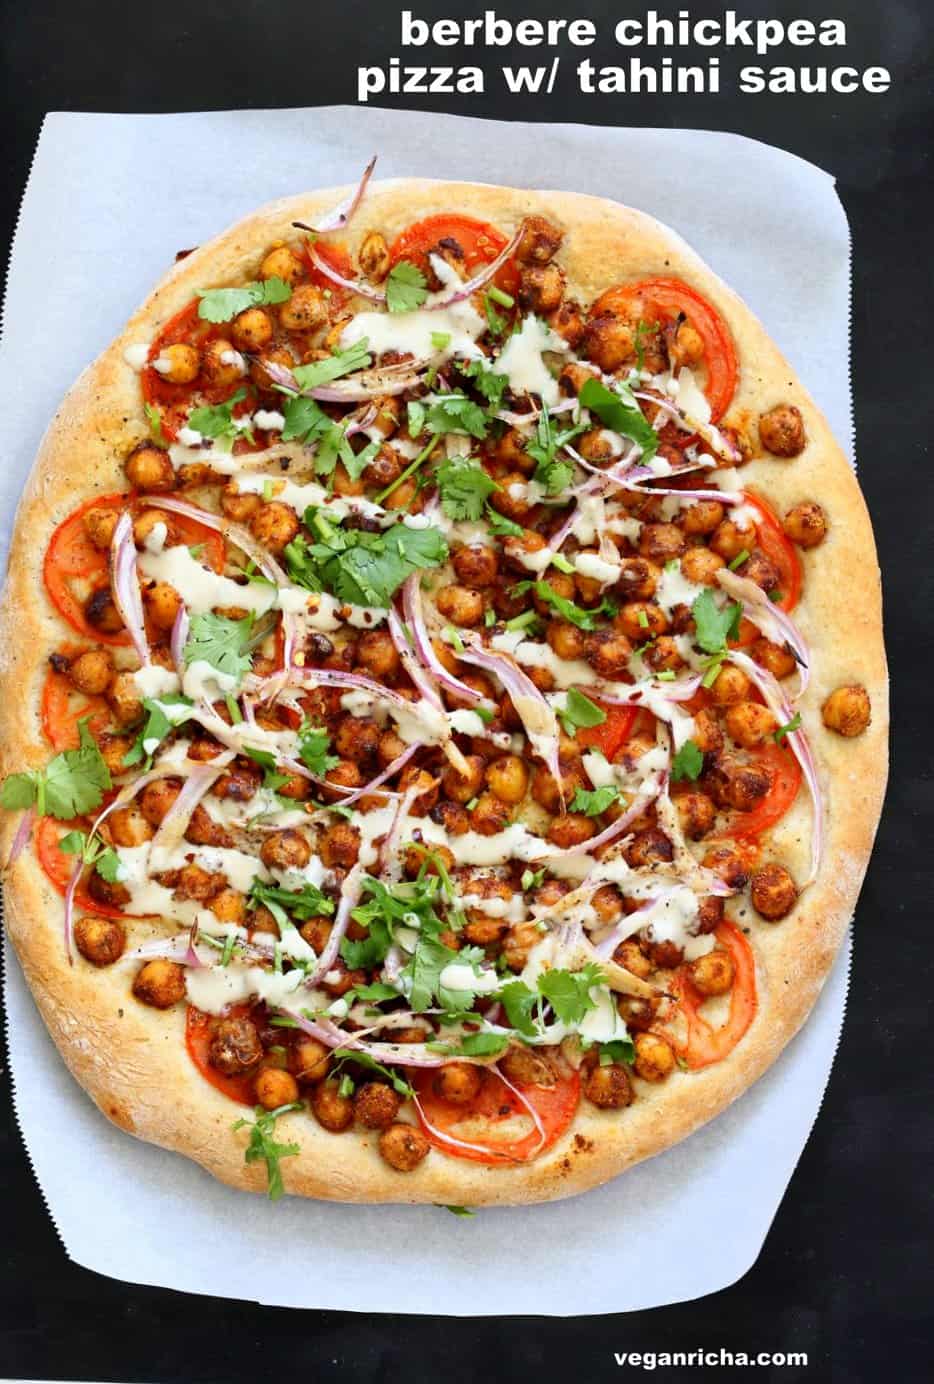 pizza crust with chickpeas and tahini sauce